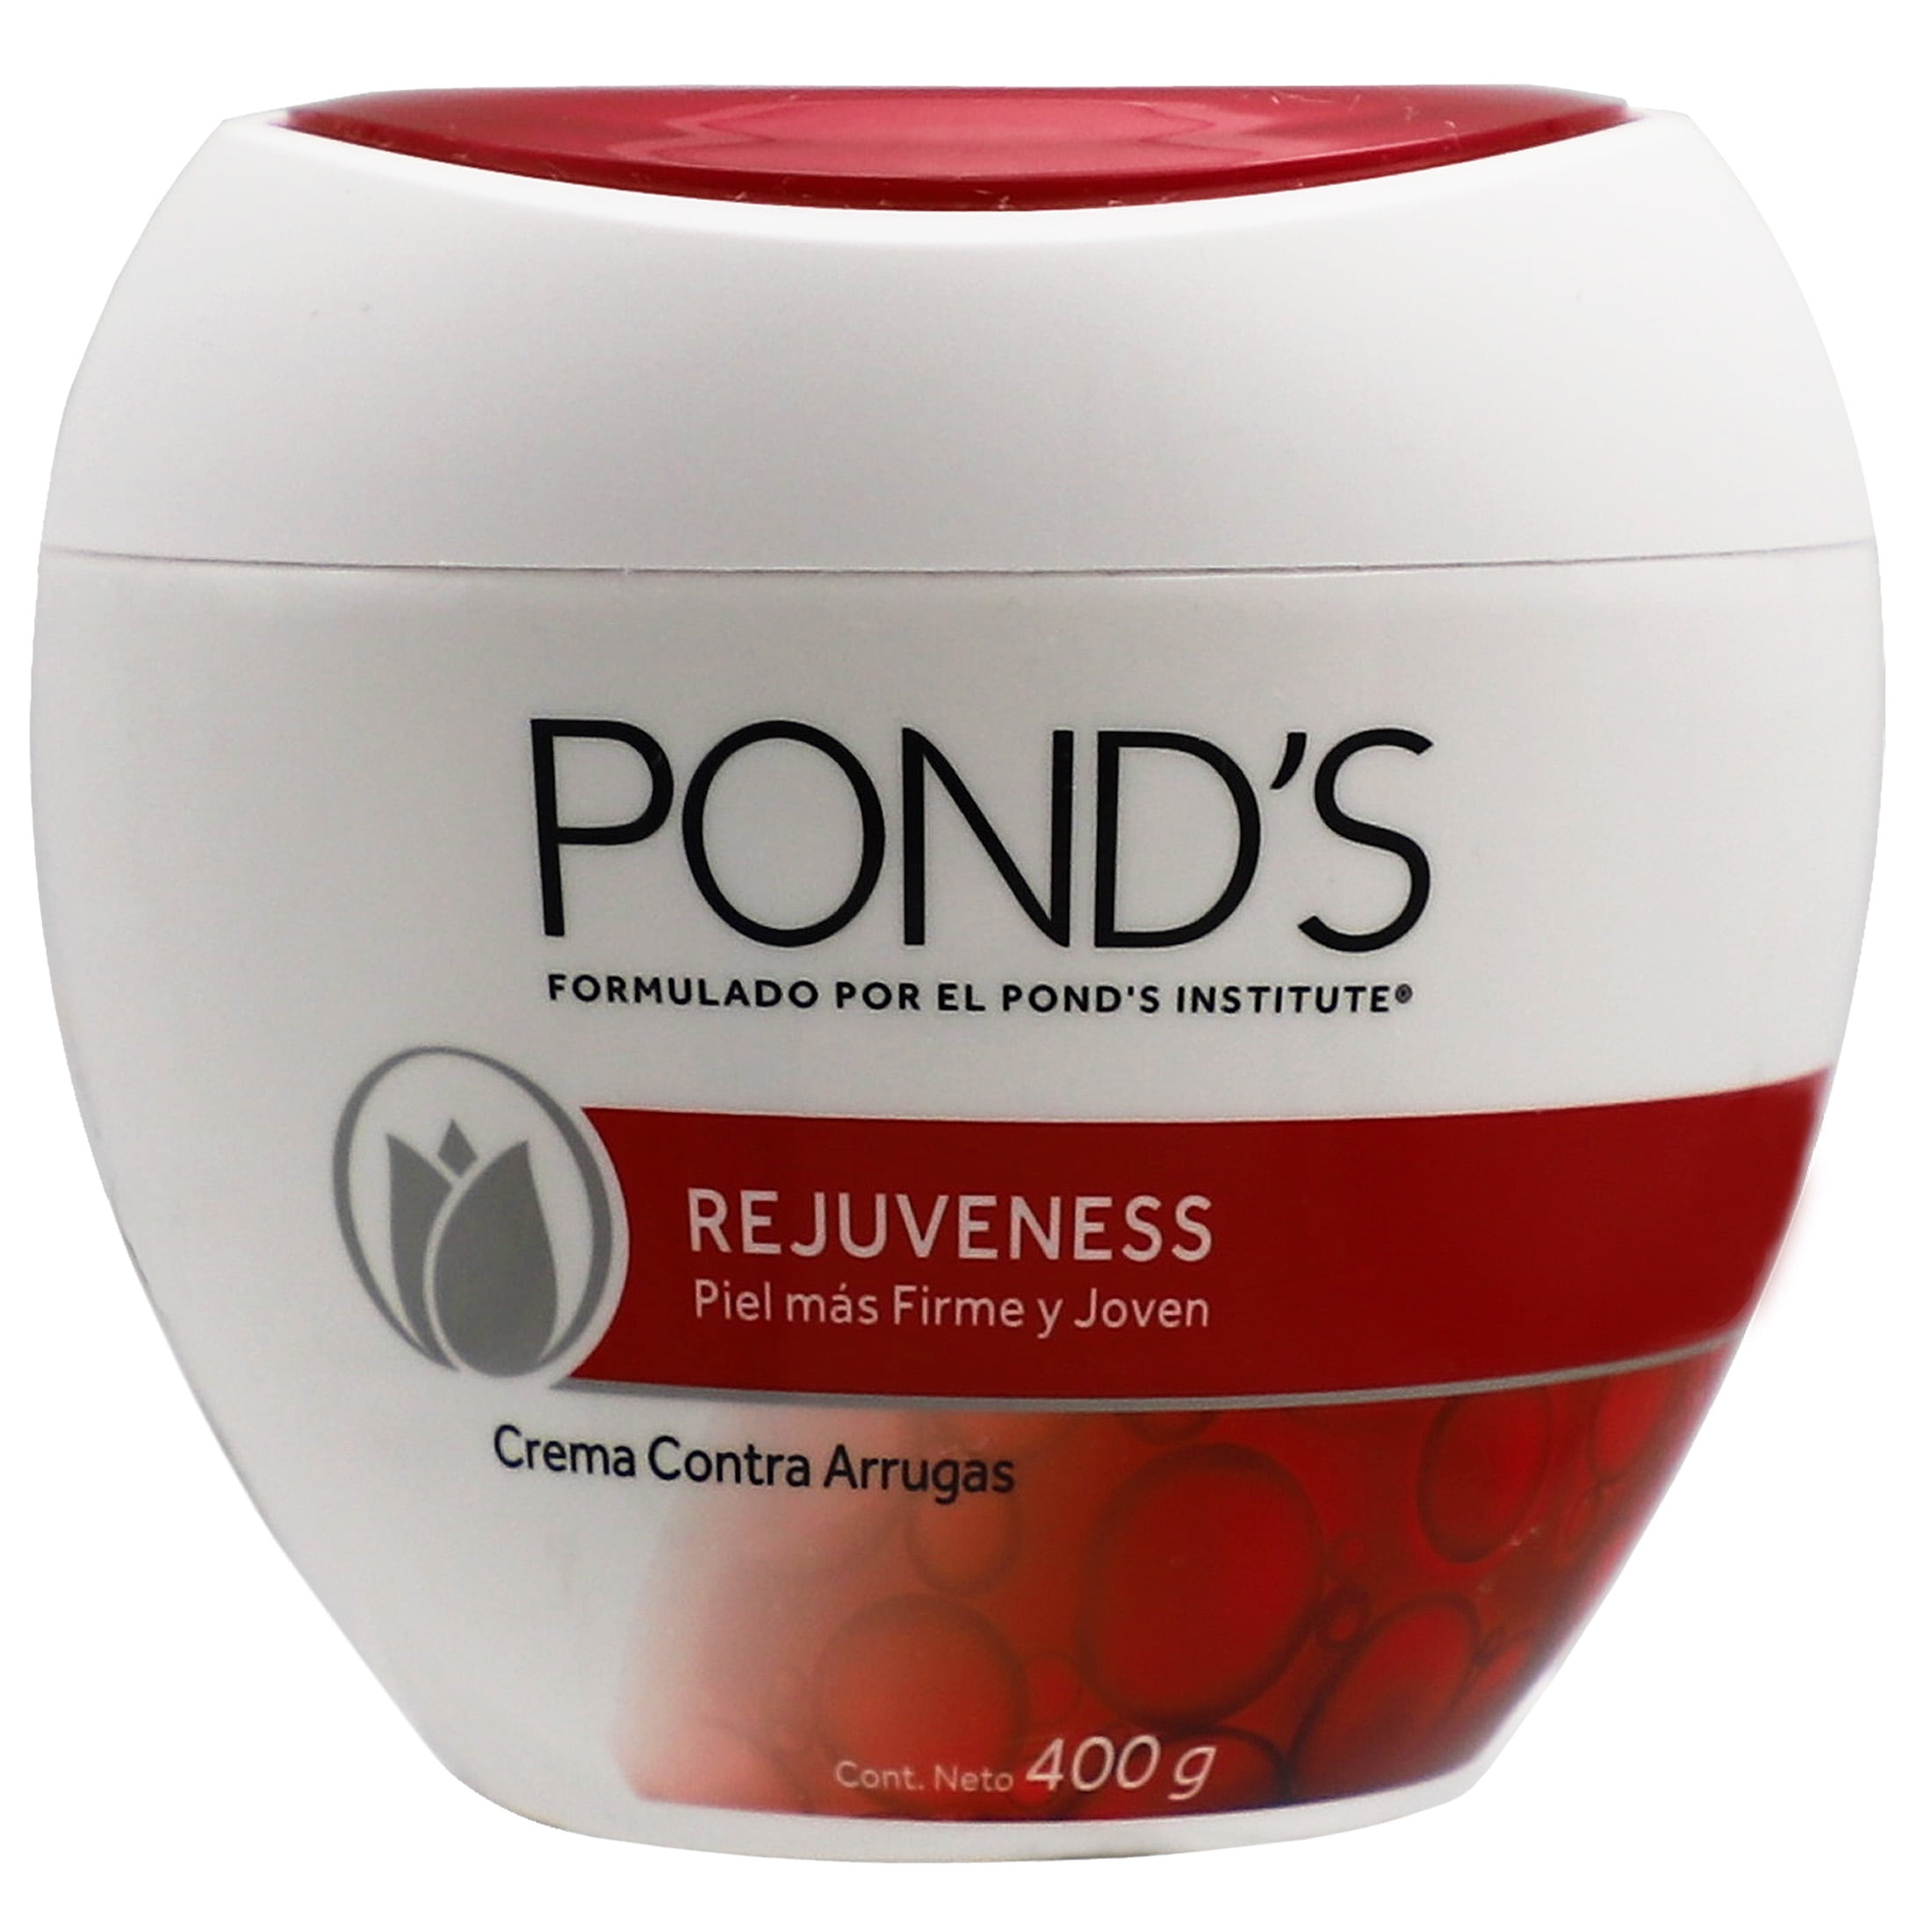 Pond S Rejuveness Anti Wrinkle Face Cream With Vitamin E And Collagen All Skin Types 14 2 Oz